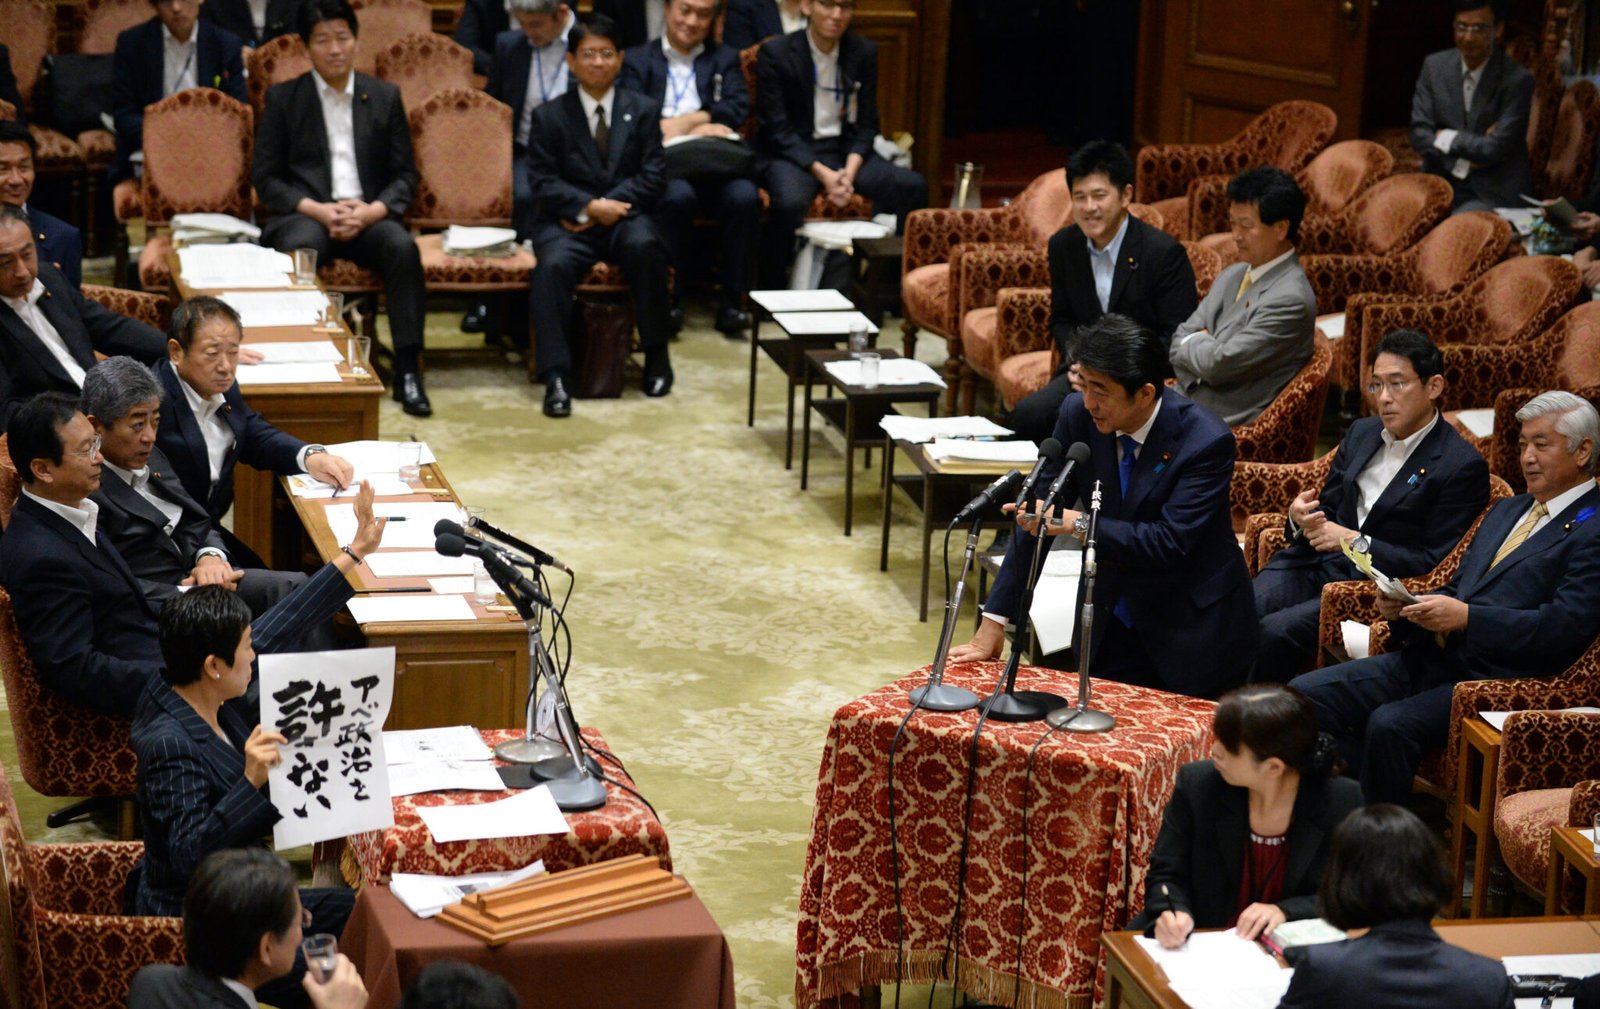 Old pic(2015): Former Japanese PM Shinzo Abe in Japanese parliament